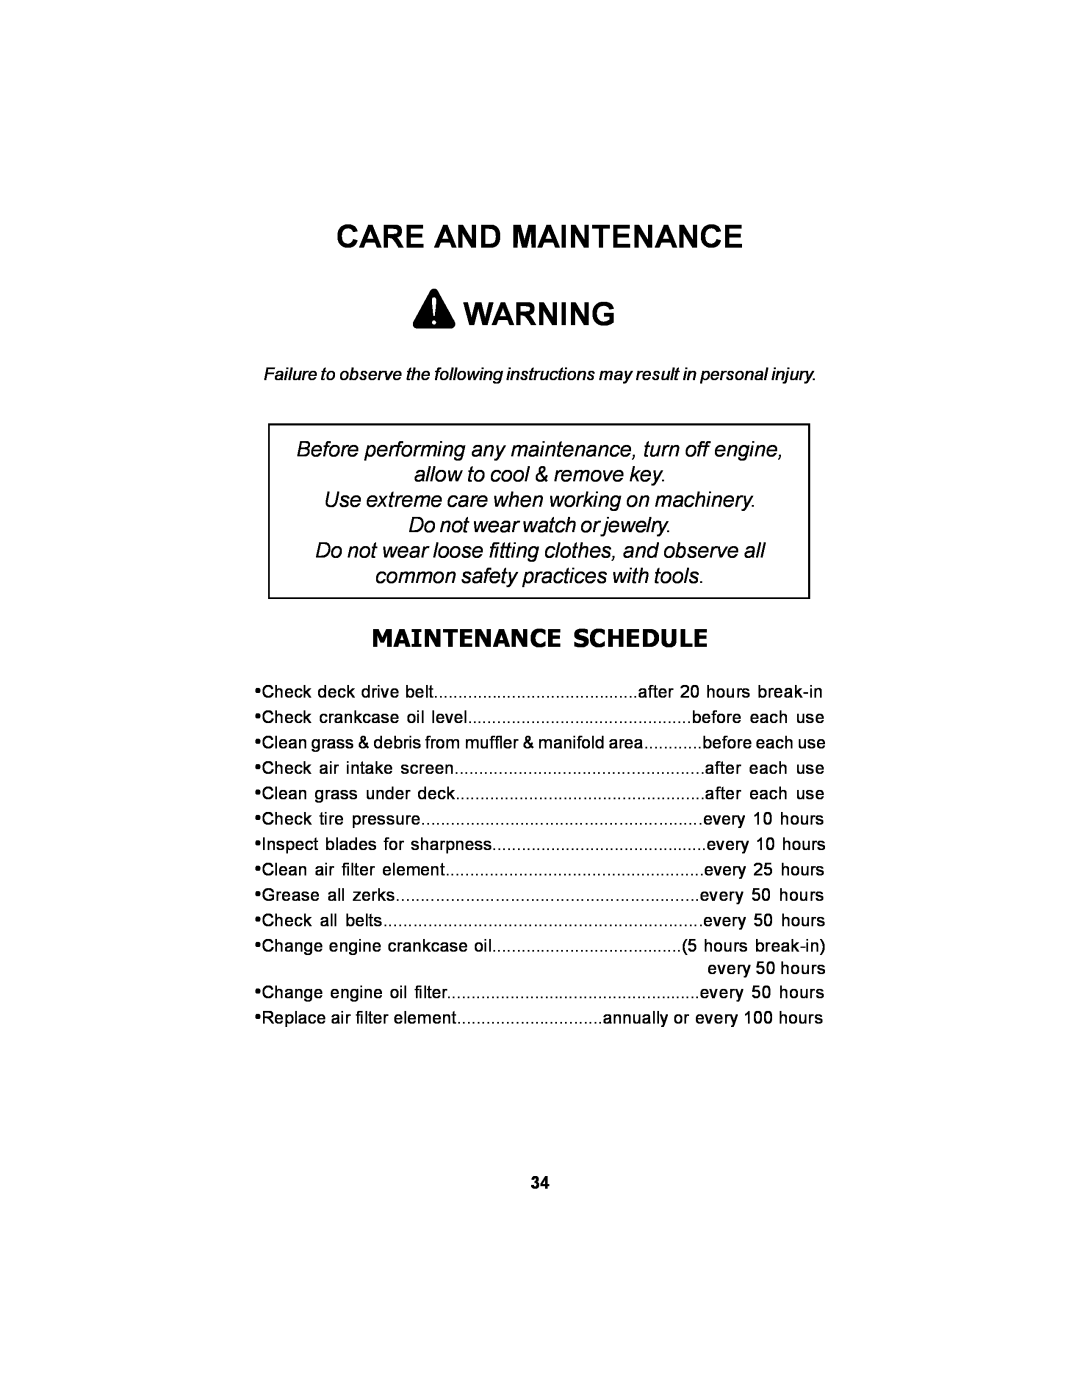 Dixon 36 manual Care And Maintenance, Maintenance Schedule, Before performing any maintenance, turn off engine 